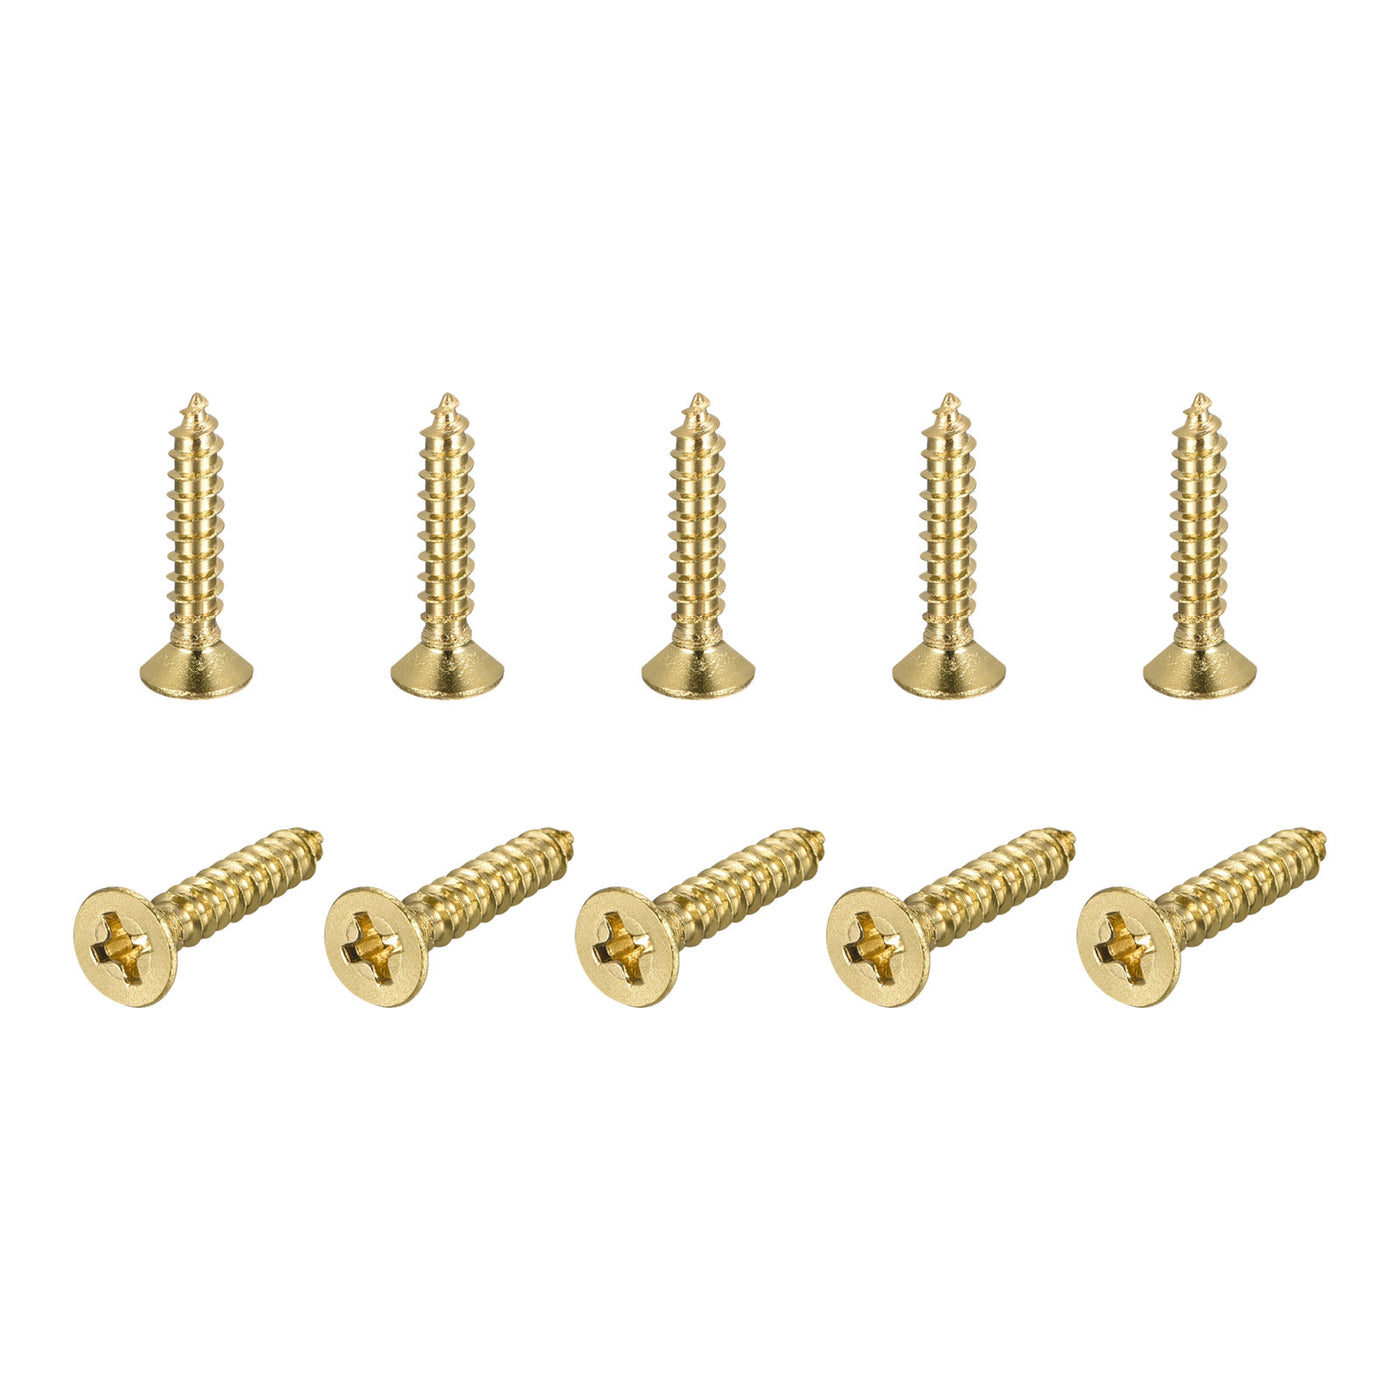 uxcell Uxcell Brass Wood Screws, M4x20mm Phillips Flat Head Self Tapping Connector for Door, Cabinet, Wooden Furniture 50Pcs